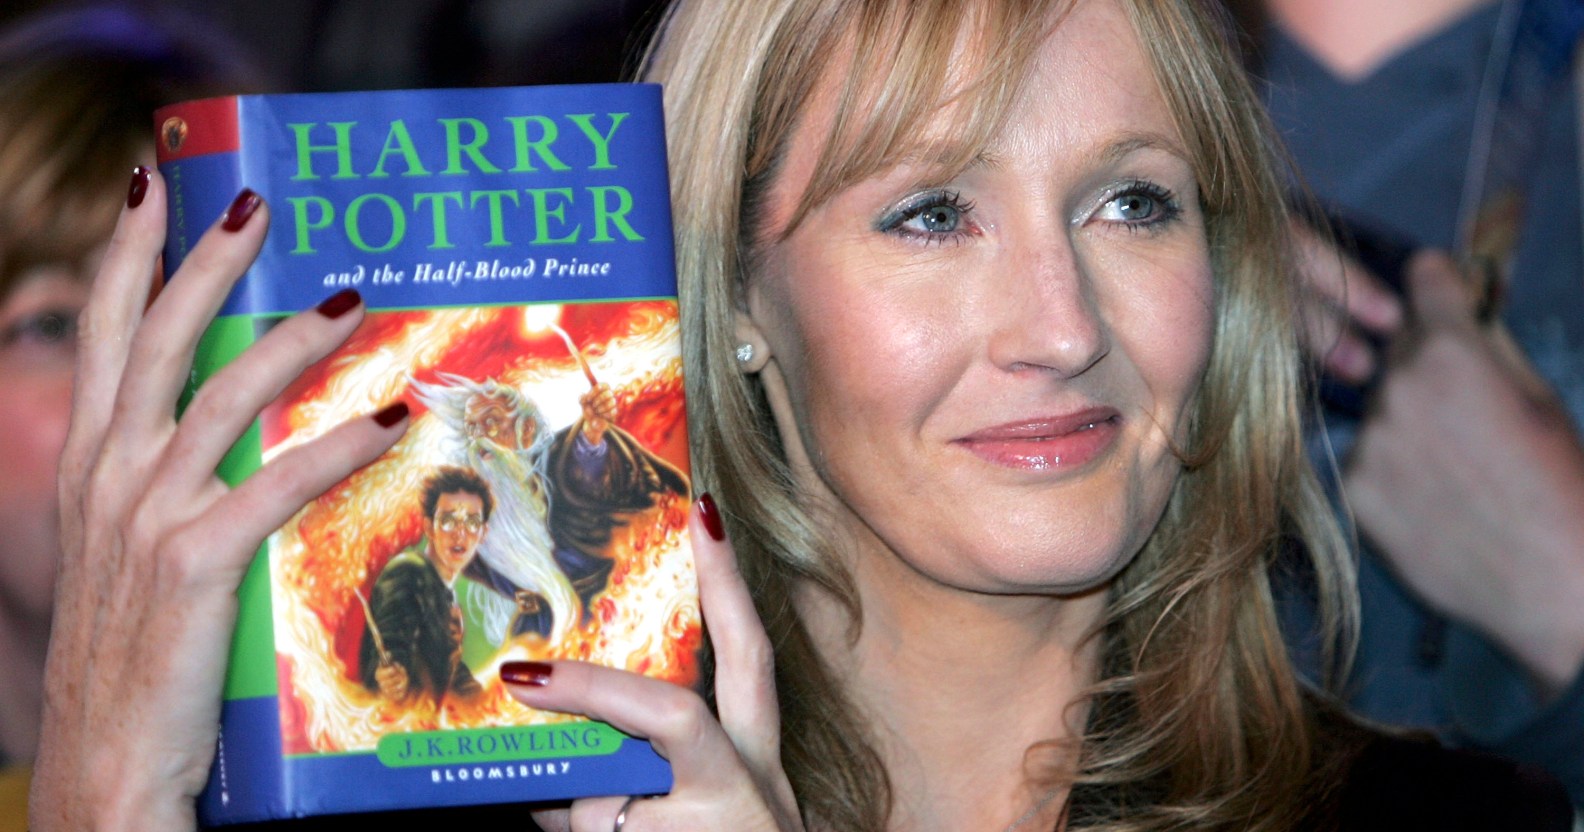 JK Rowling holds Harry Potter book